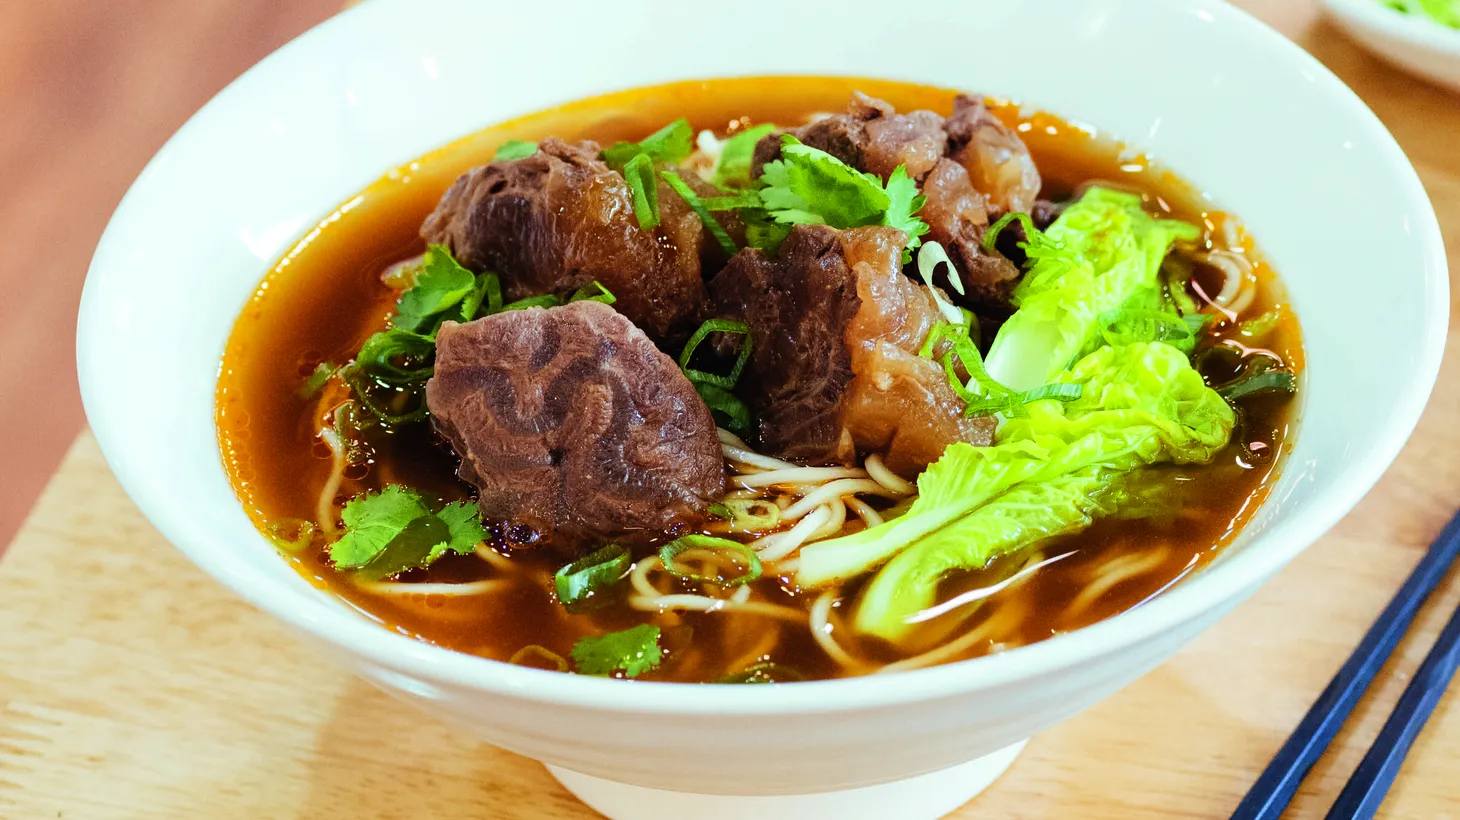 Beef noodle soup became popular in Taiwan after 1949, when a surge of Chinese refugees came to the island with the nationalist government during the Chinese Civil War.